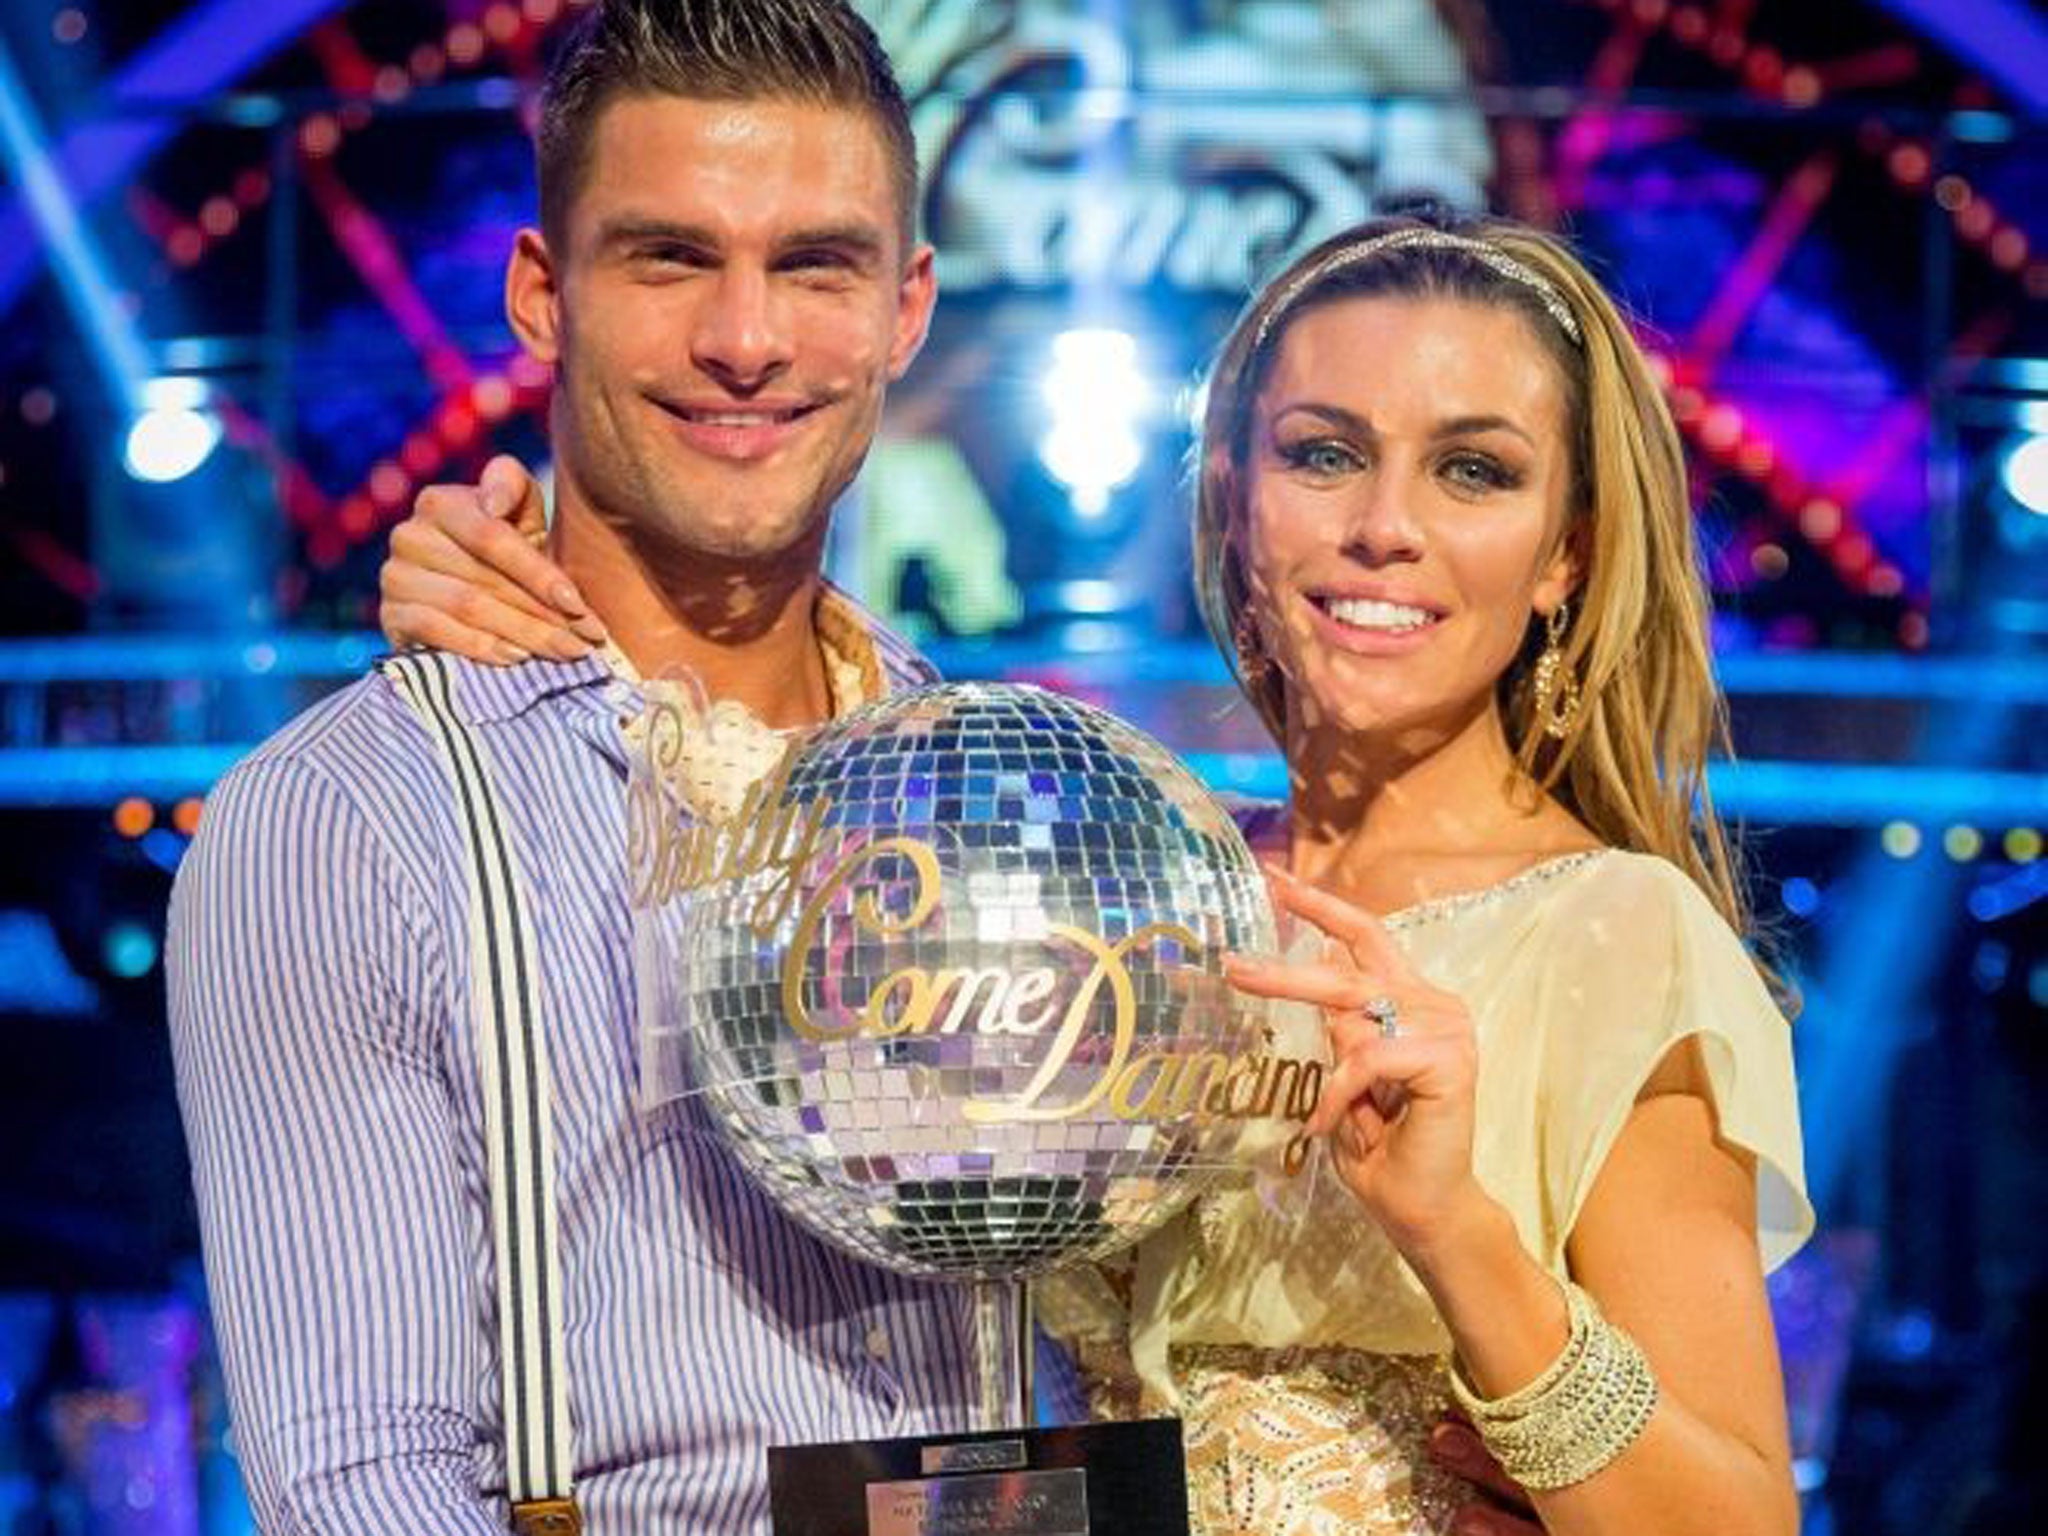 At its height, the audience hit 12.6 million as viewers tuned in to see Clancy gyrate to triumph in the BBC1 show to round off the 2013 series.